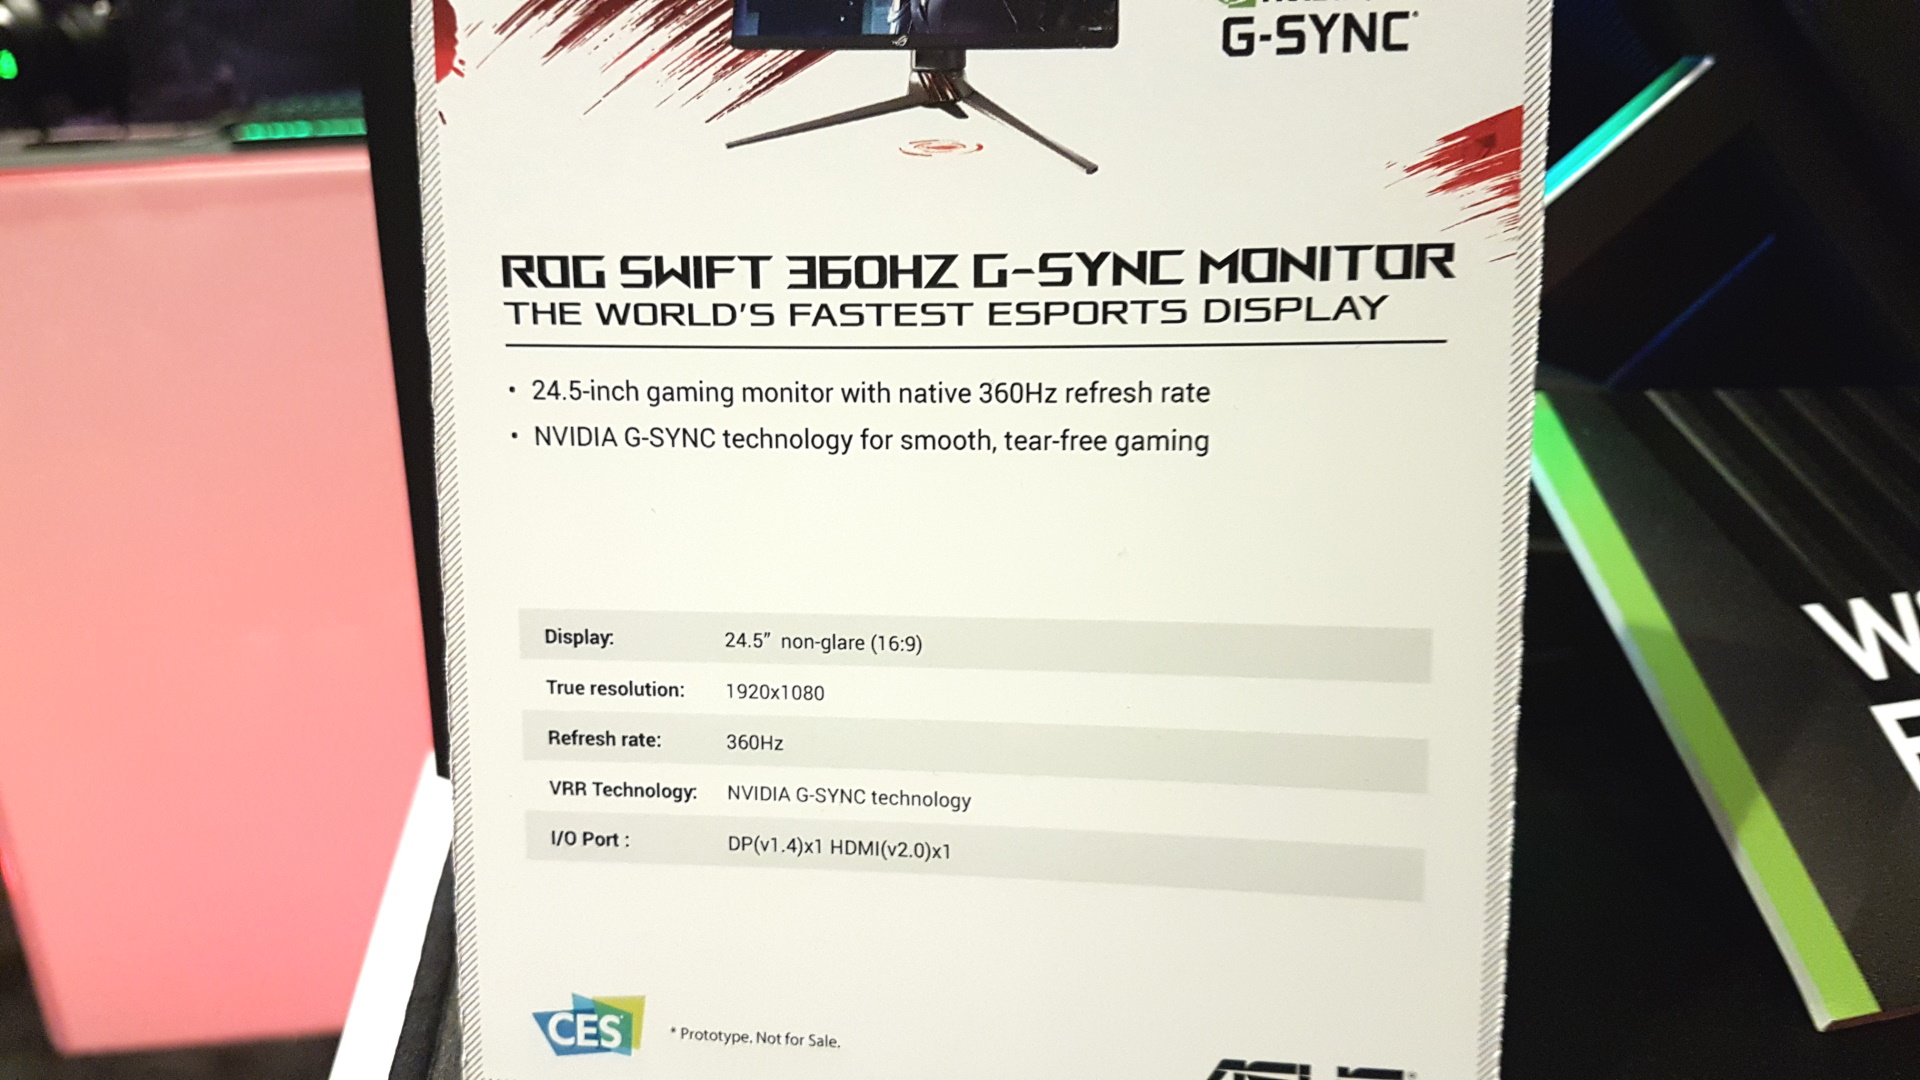 The ROG Swift 360Hz is the world's fastest esports gaming monitor